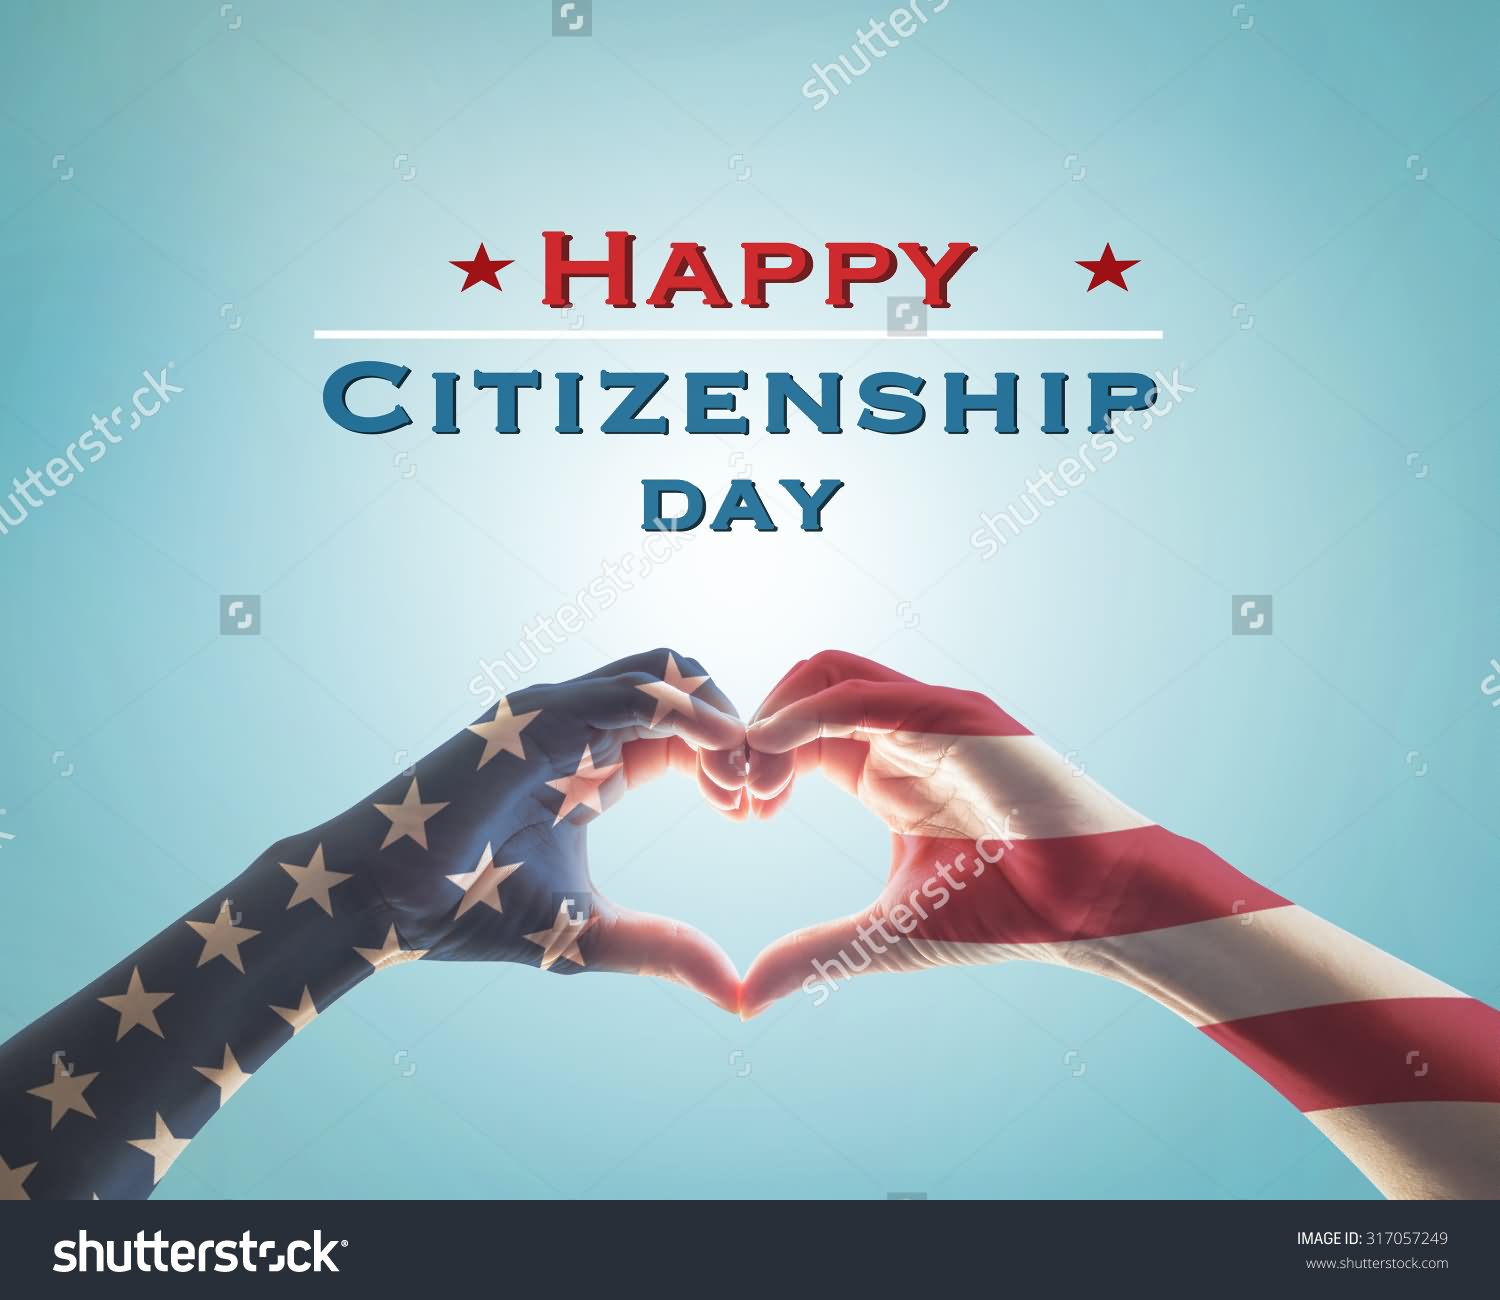 Happy Citizenship Day Wishes With American Flag On Hand Heart Picture